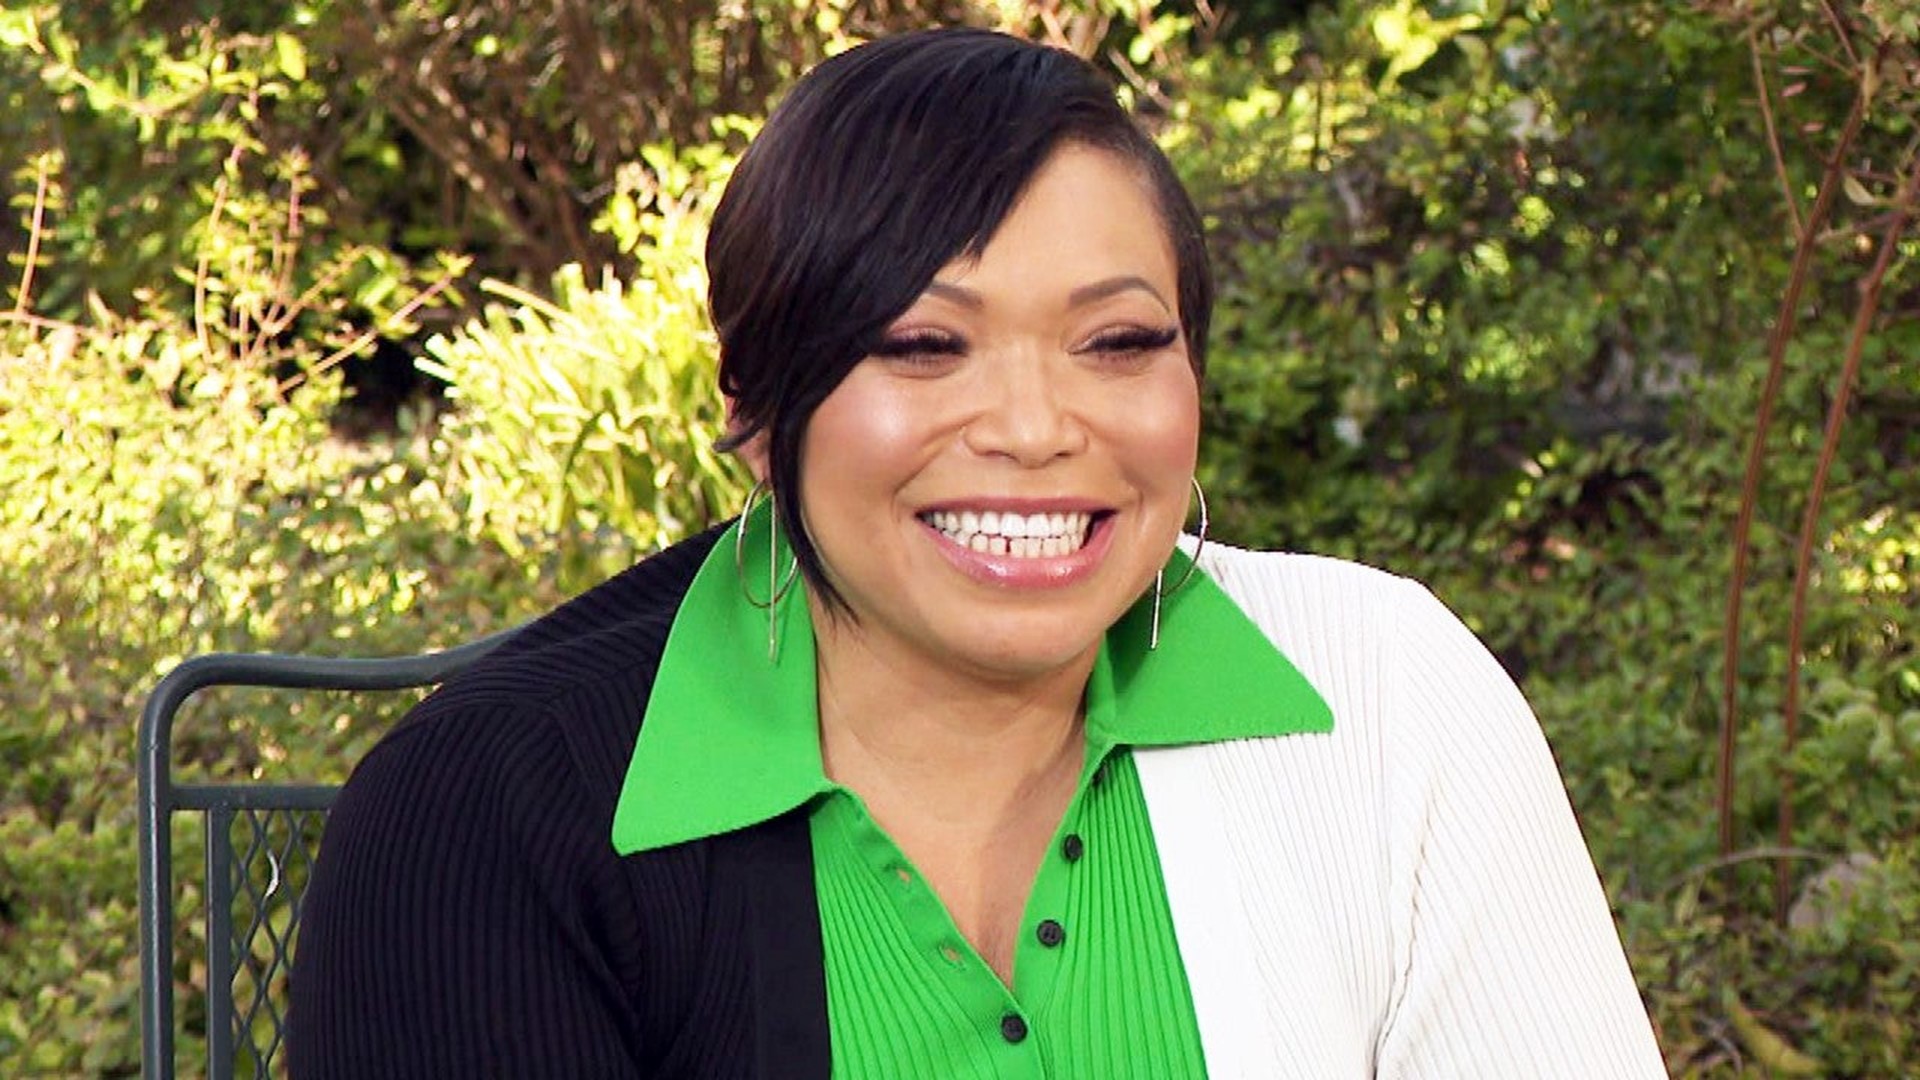 Tisha Campbell Reflects on the Importance of 'Martin' and Hopes for a